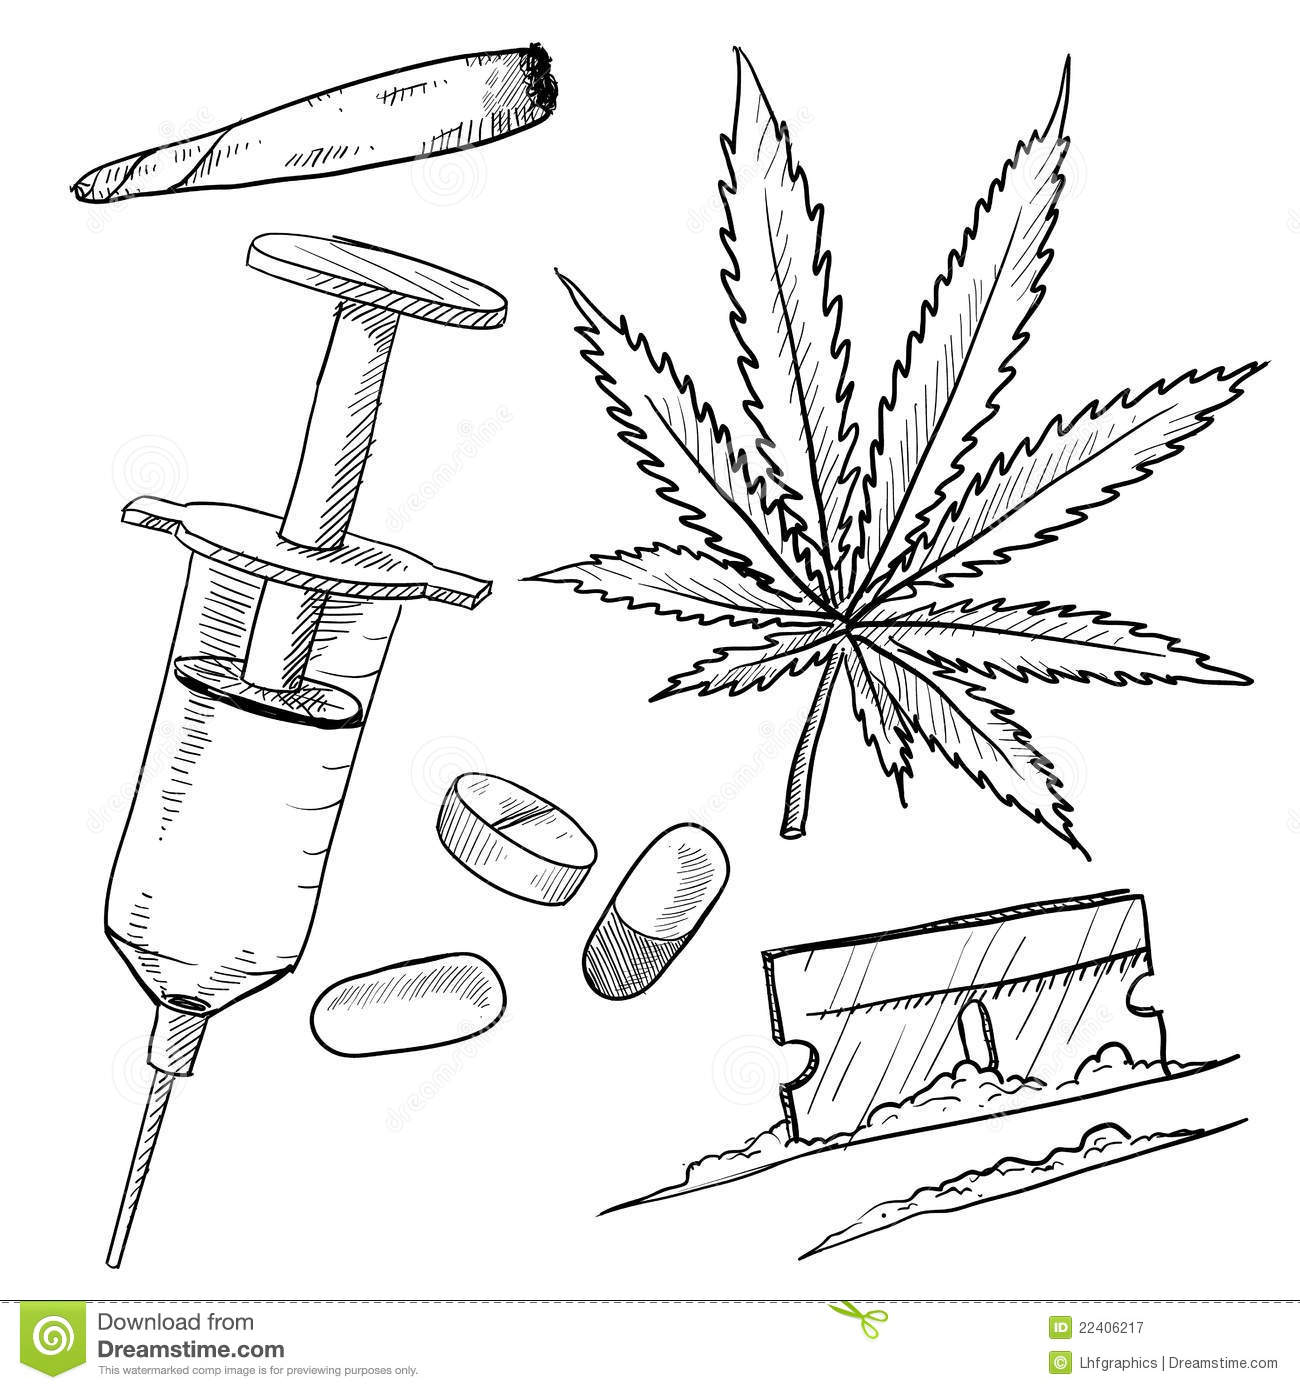 Illegal Drugs Drawing Royalty Free Stock Photography   Image  22406217